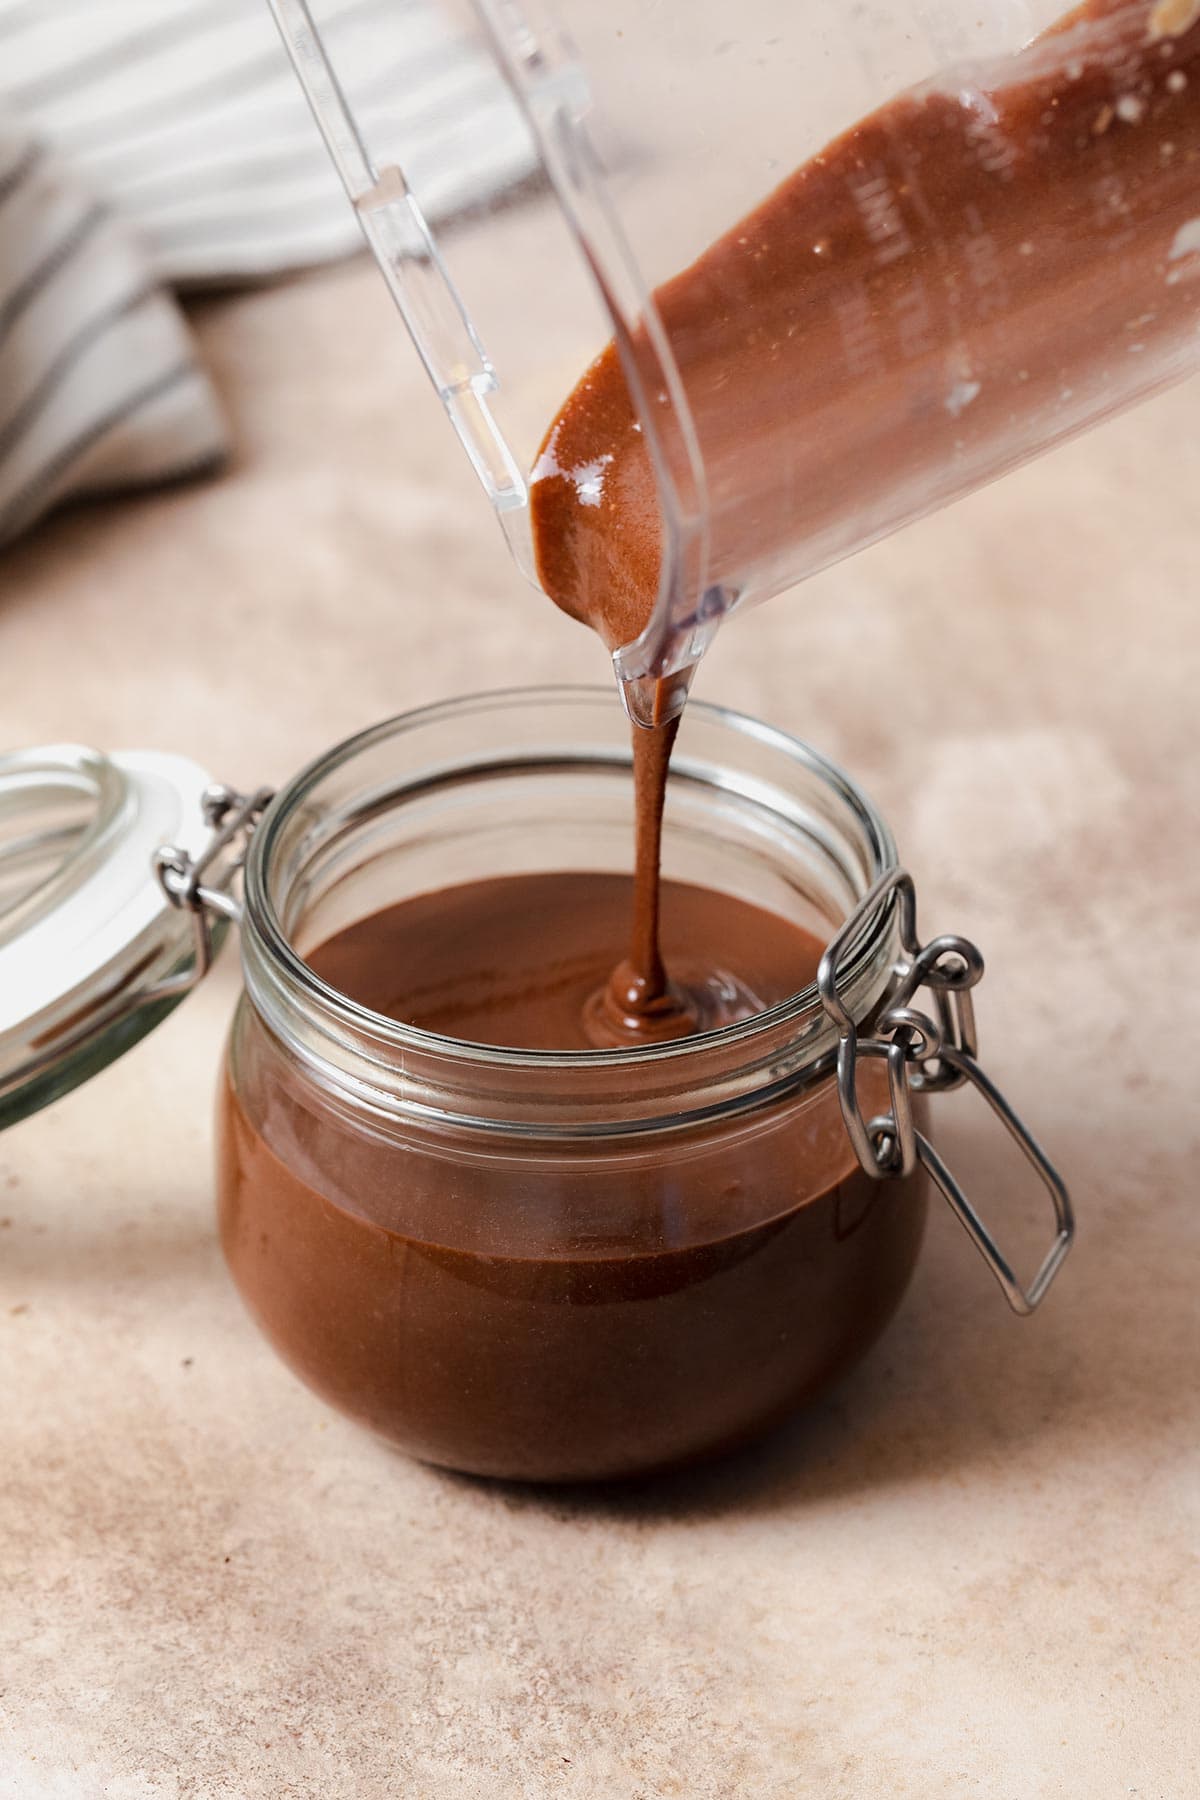 A pouring shot of healthy nutella being poured from the blender into a glass jar. On a beige background.